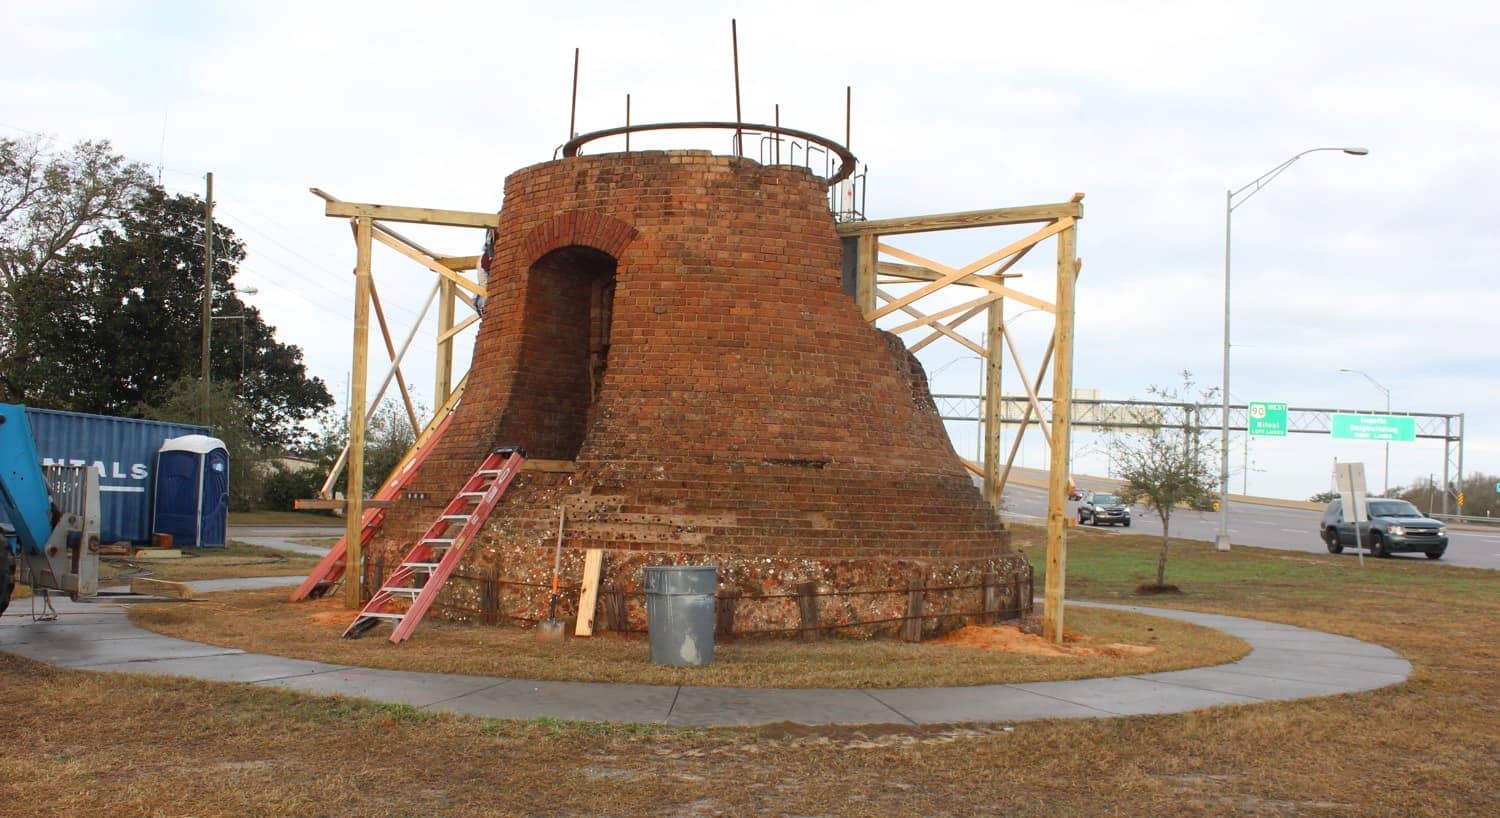 The base of the lighthouse in it's new location in Pascagoula